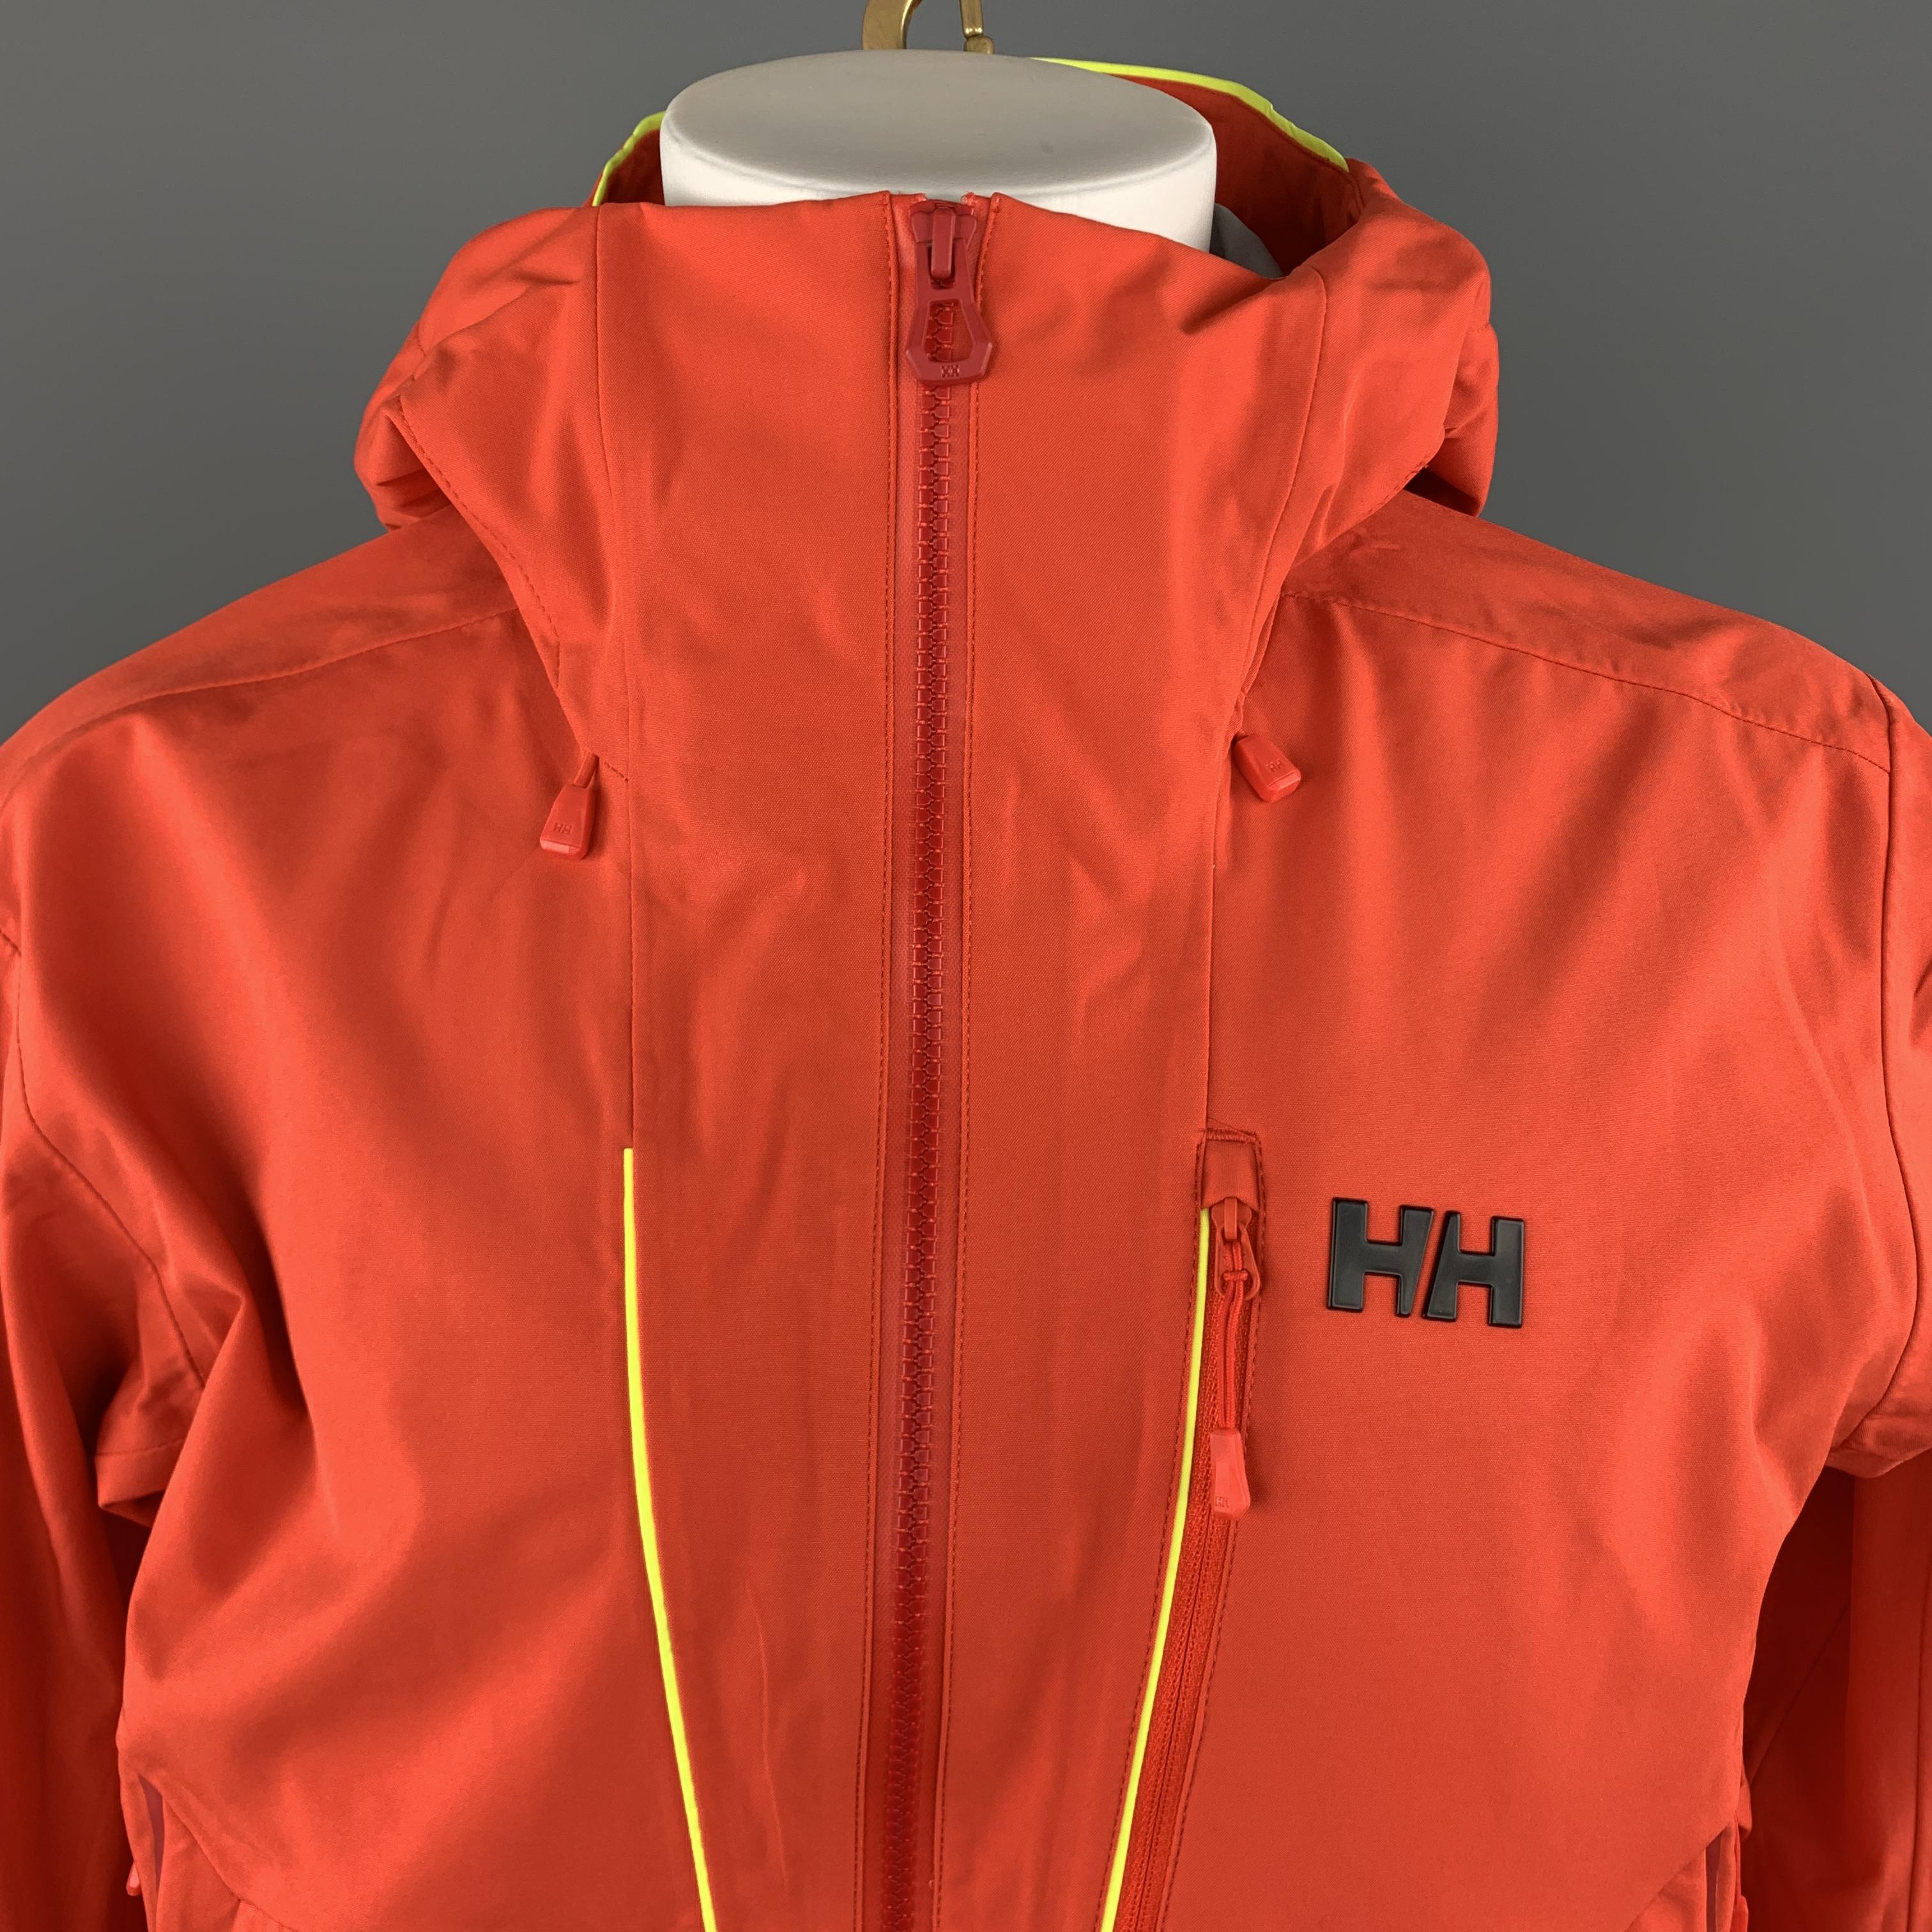 HELLY HANSON ski jacket comes in bold orange water poof material with yellow piping, multiple zip pockets throughout, hand sleeve cuffs, and cap hood. 

Excellent Pre-Owned Condition.
Marked: M

Measurements:

Shoulder: 21 in.
Chest: 50 in.
Sleeve: